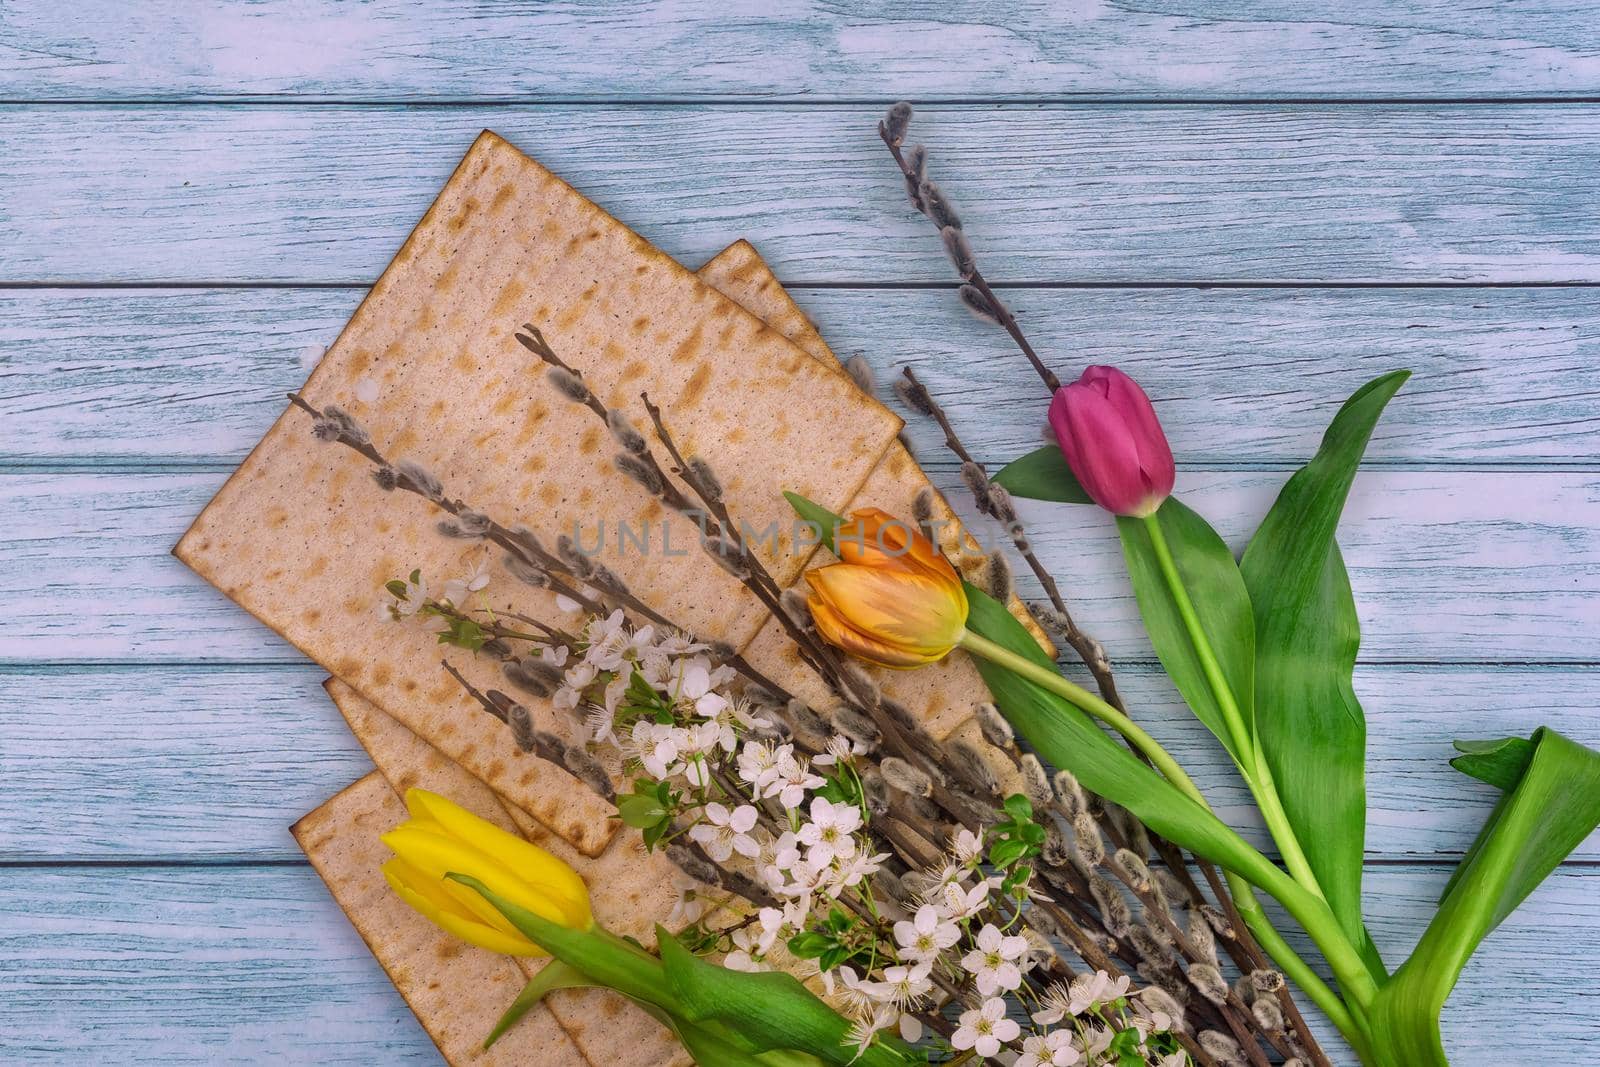 Tradition attributes symbols for Passover festival with matzo unleavened bread on preash celebration holiday